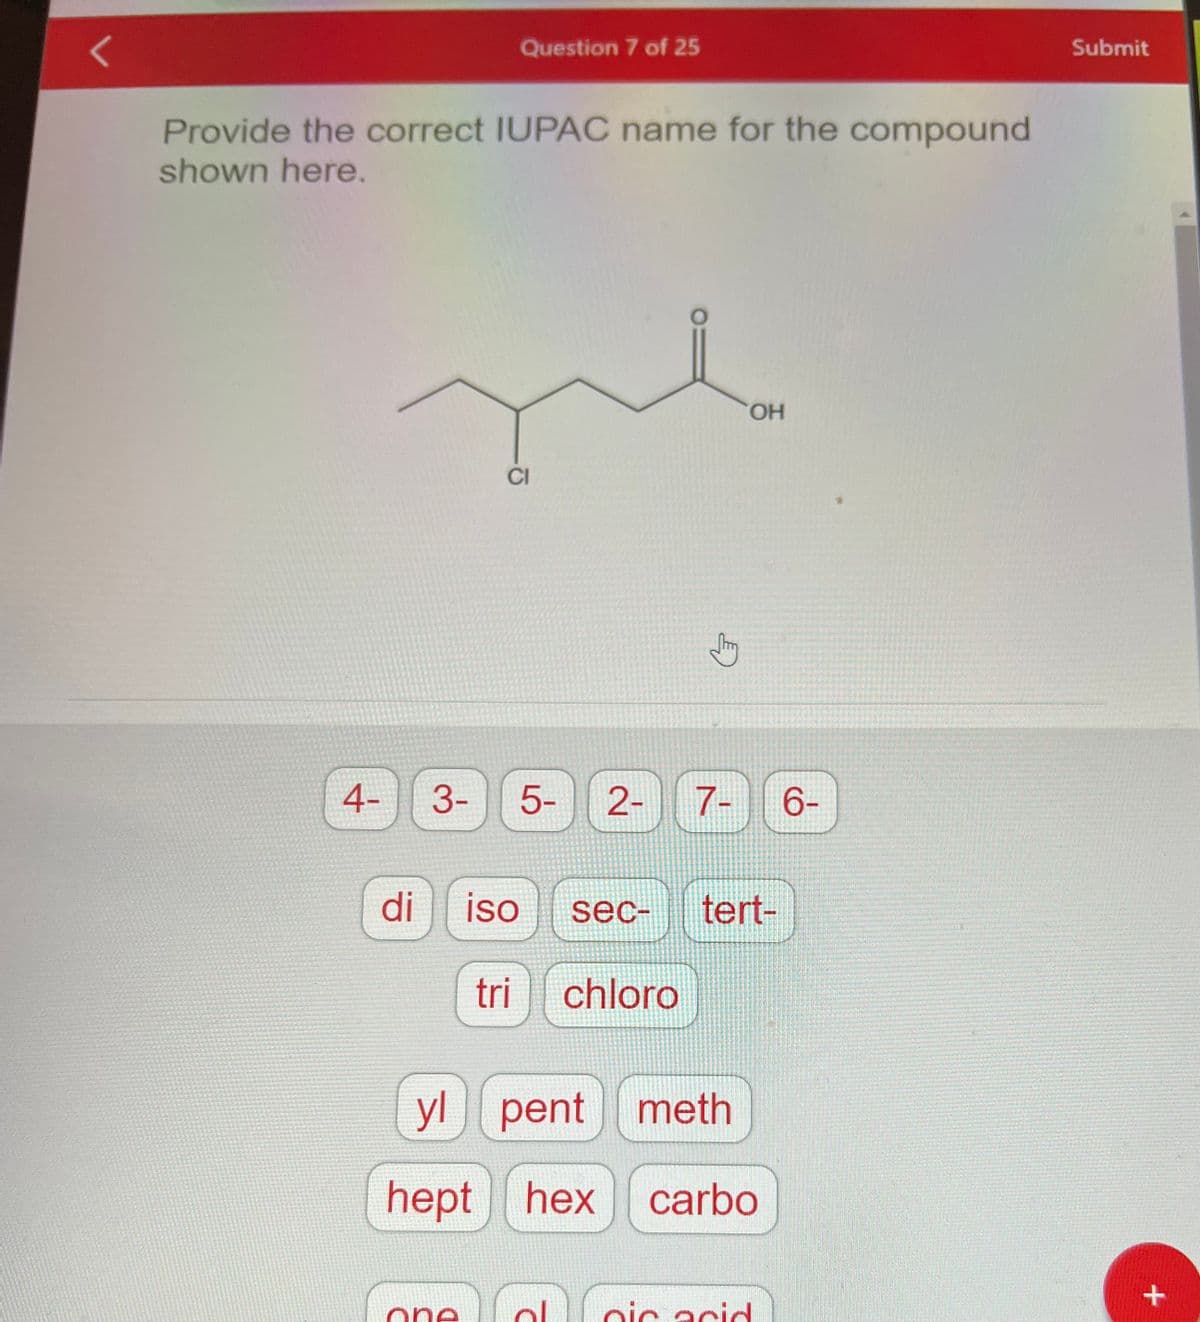 Provide the correct IUPAC name for the compound
shown here.
4-
di
3-
Question 7 of 25
One
CI
5- 2- 7-
iso
sec-
tri chloro
2
OH
yl pent meth
hept hex carbo
tert-
oic acid
6-
Submit
+